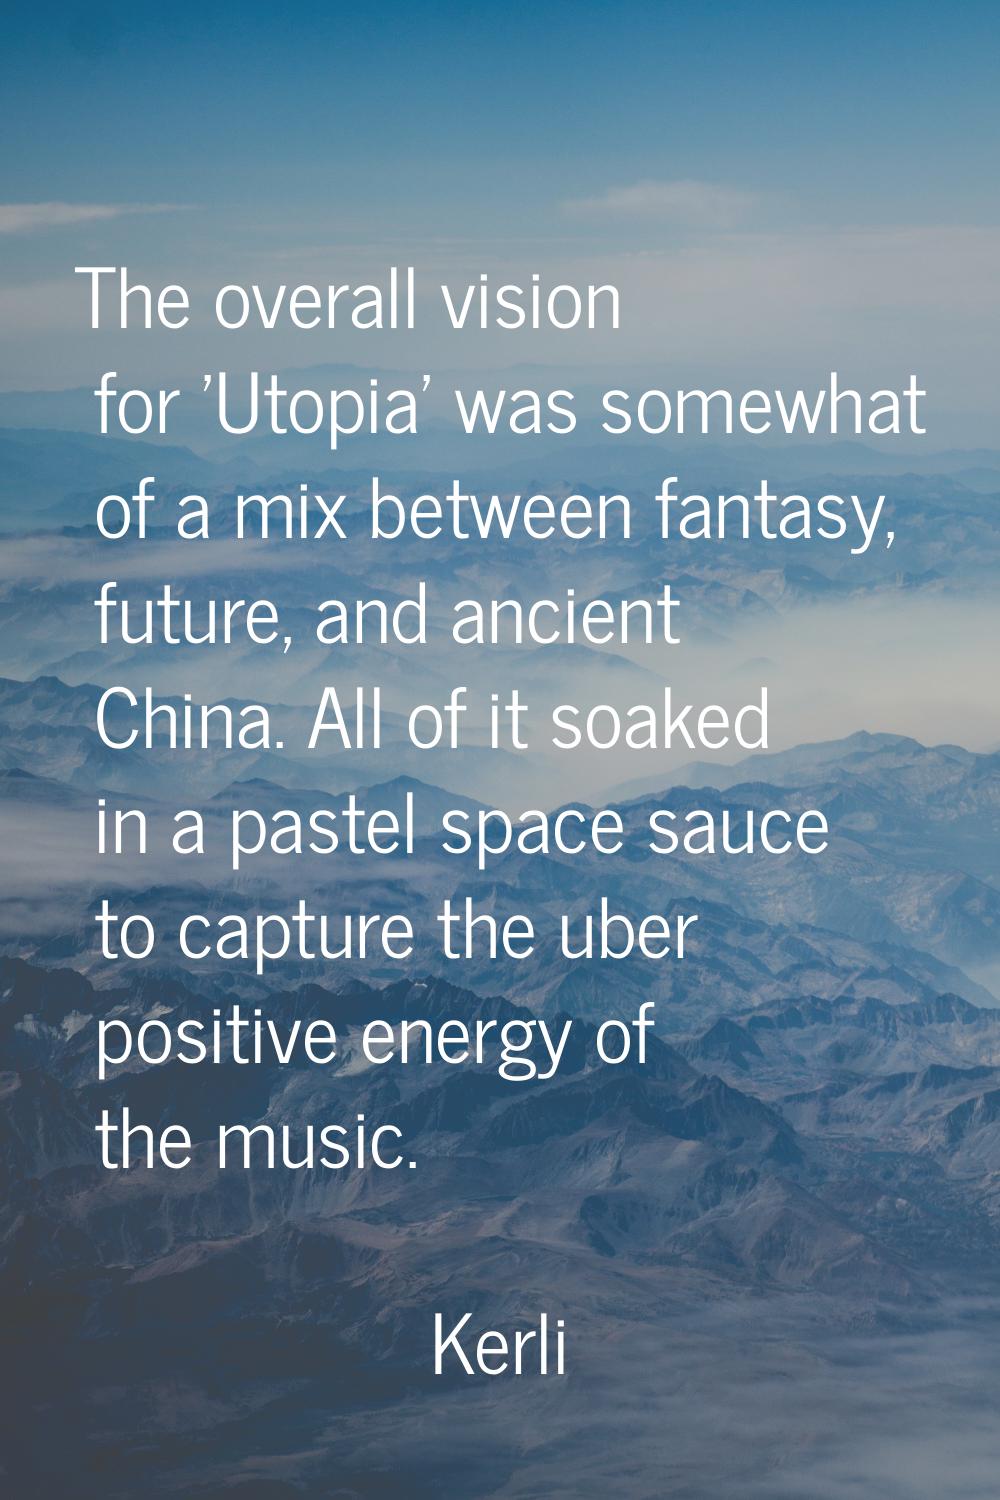 The overall vision for 'Utopia' was somewhat of a mix between fantasy, future, and ancient China. A